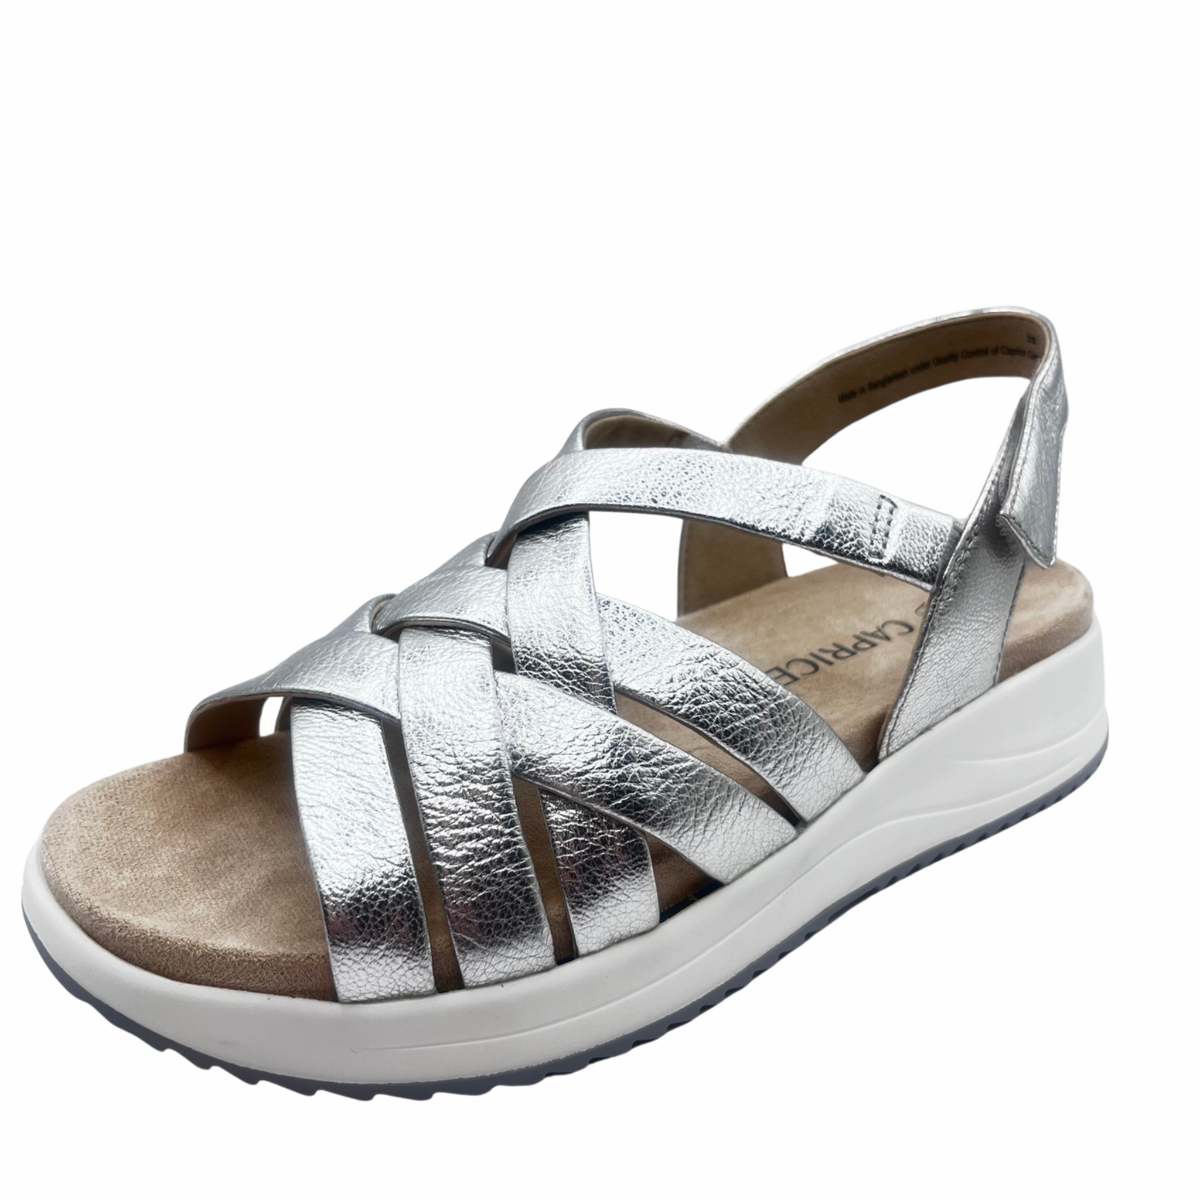 Caprice Silver Low Wedge Sandal